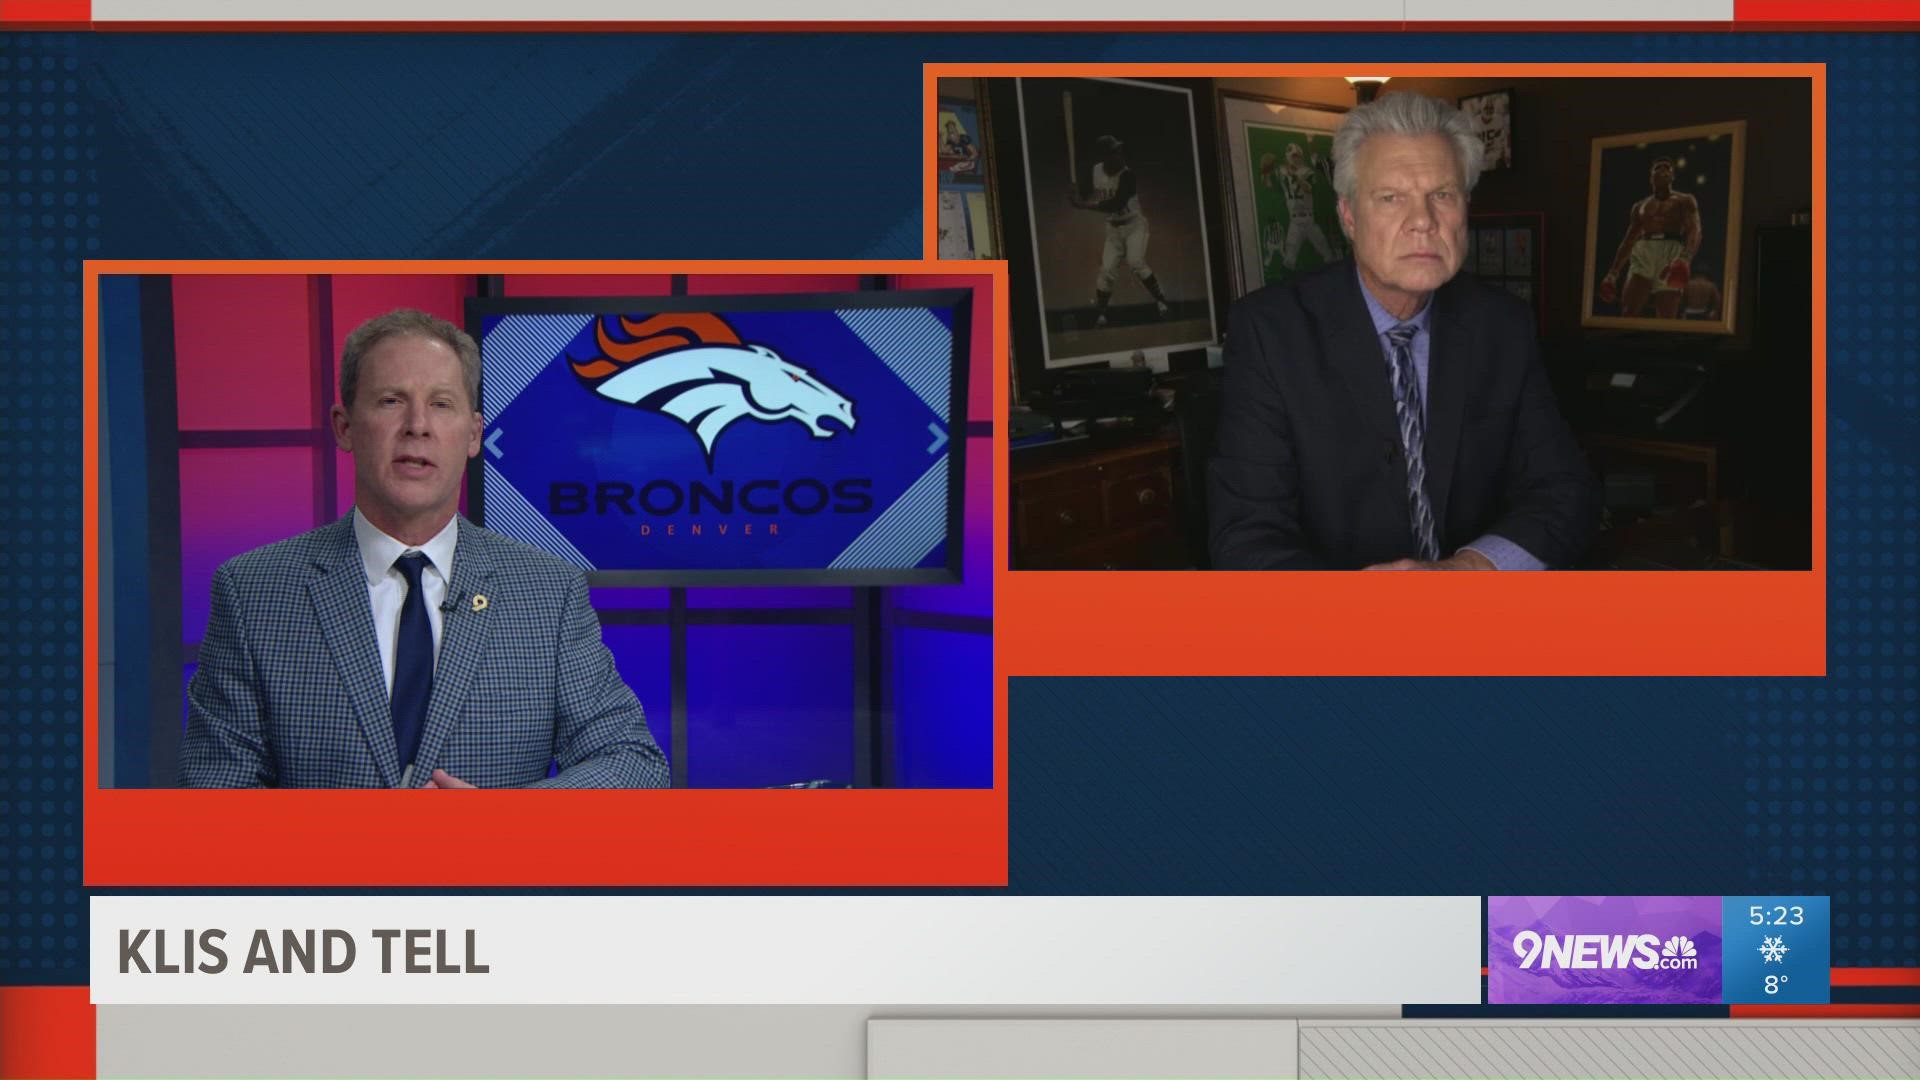 Mike Klis joined Rod Mackey to discuss the latest Denver Broncos news as the team prepares for its final game of the season.